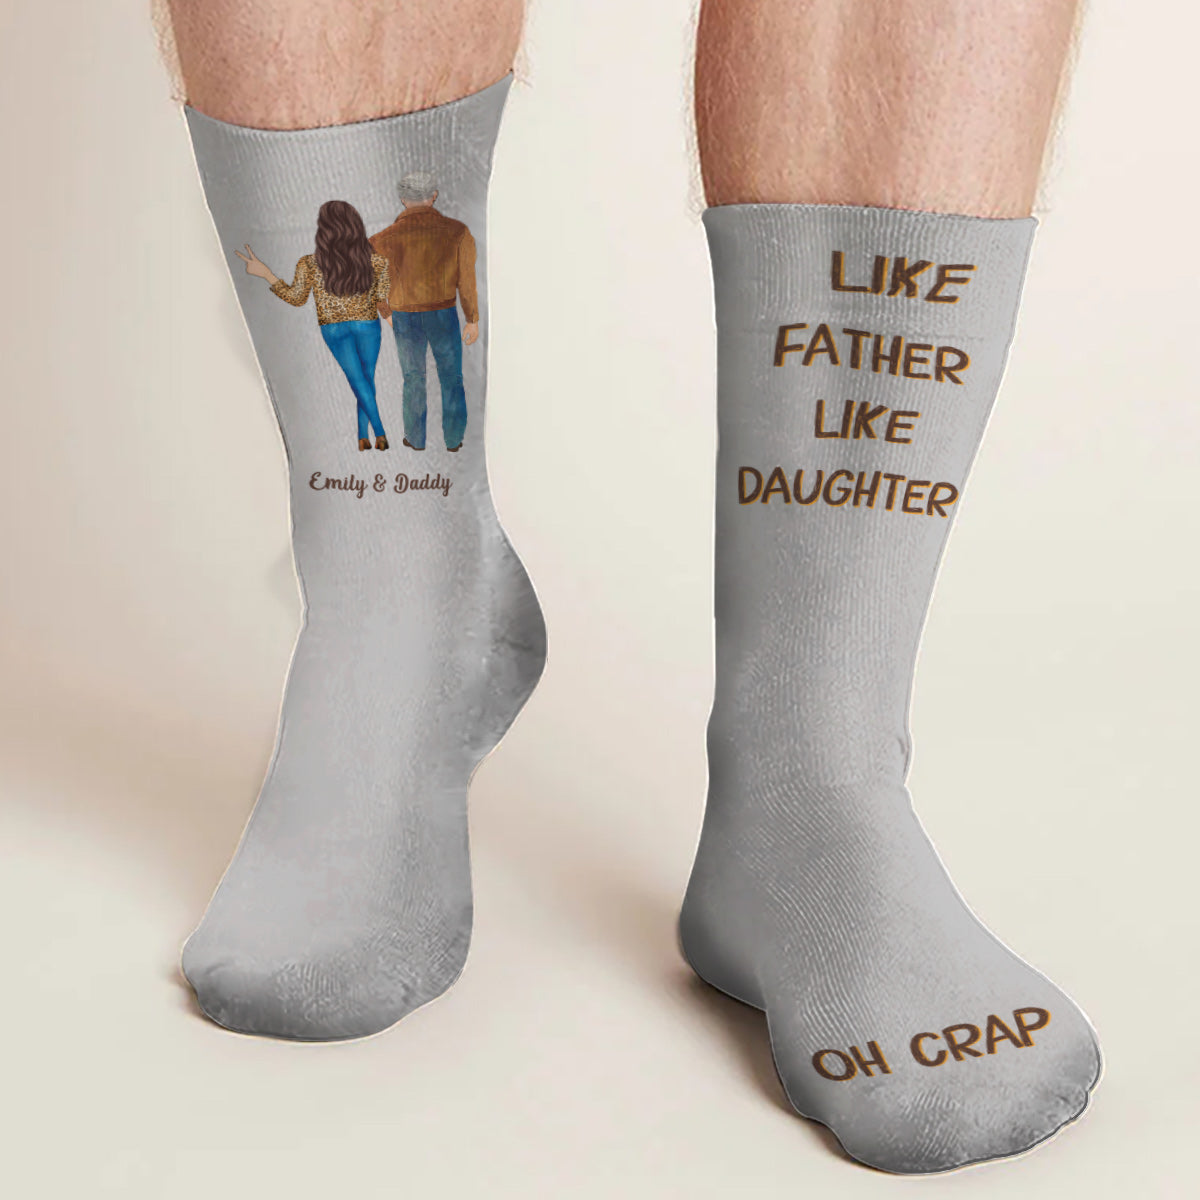 Discover Like Father Like Daughter - Personalized Father Socks